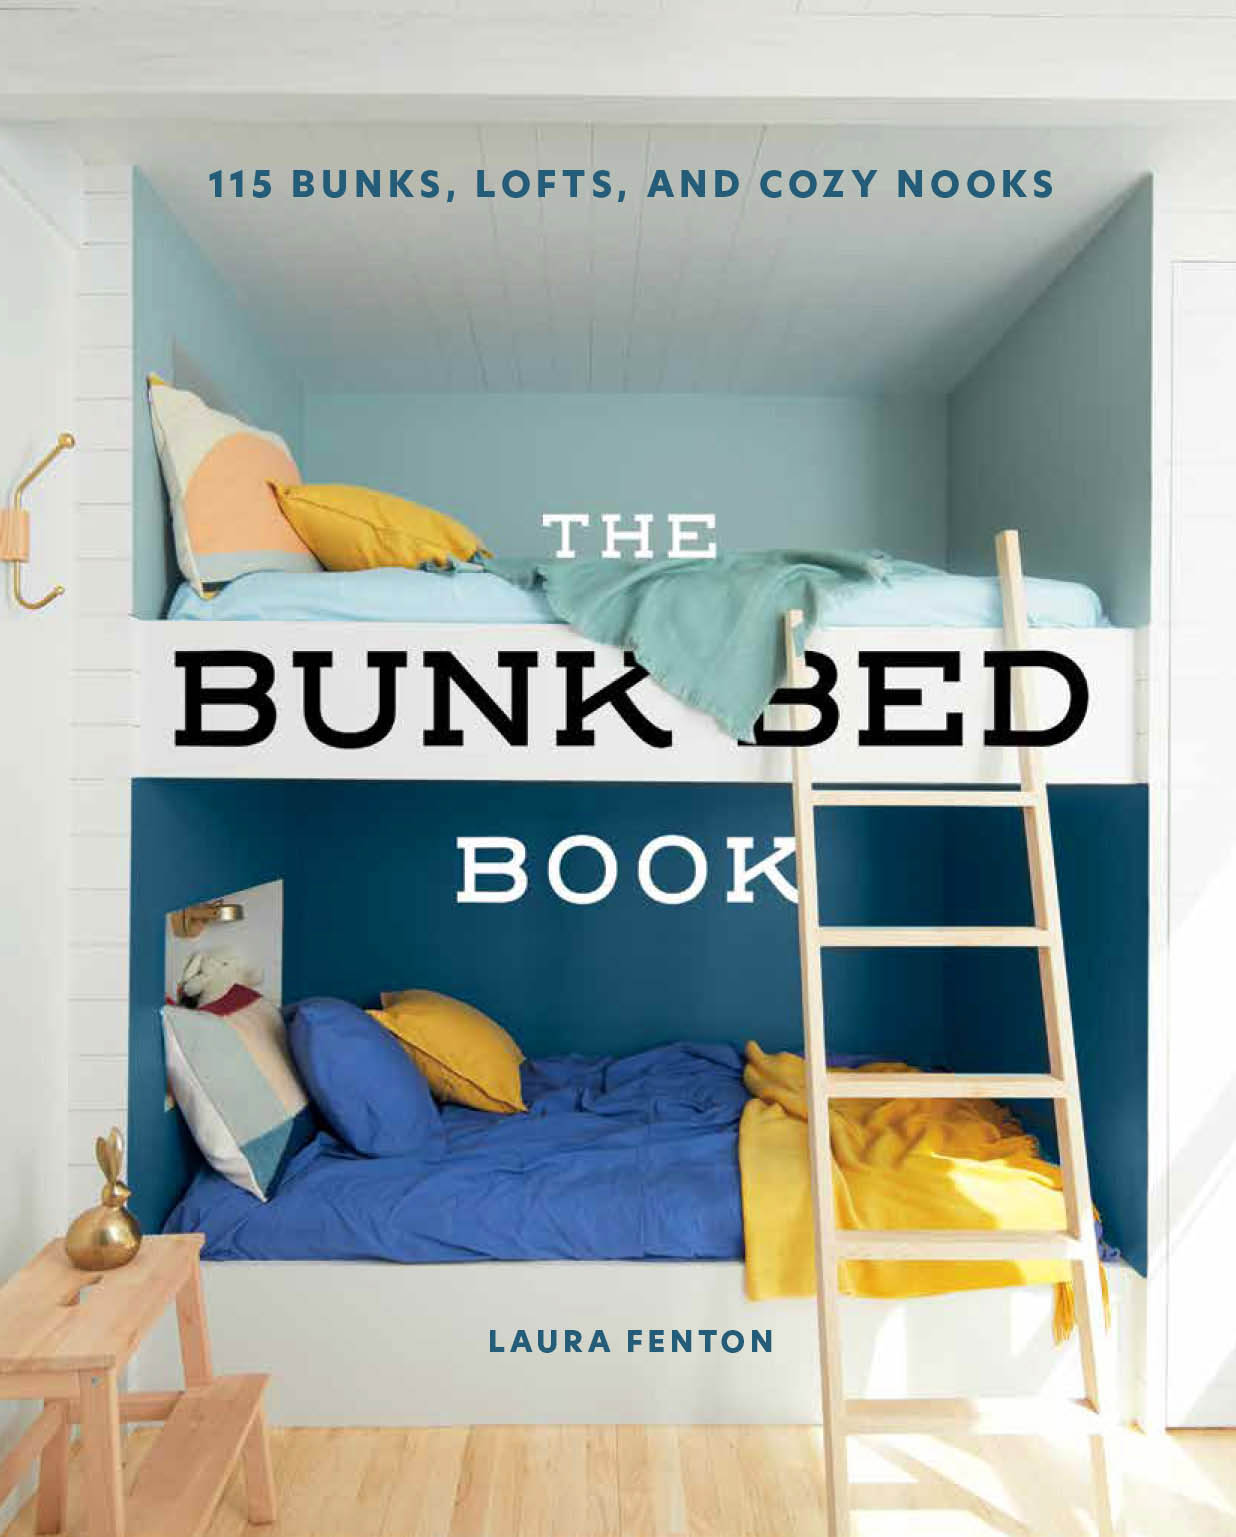 115 Bunks Lofts and Cozy Nooks THE BUNK BED BOOK Laura Fenton Photo by - photo 1